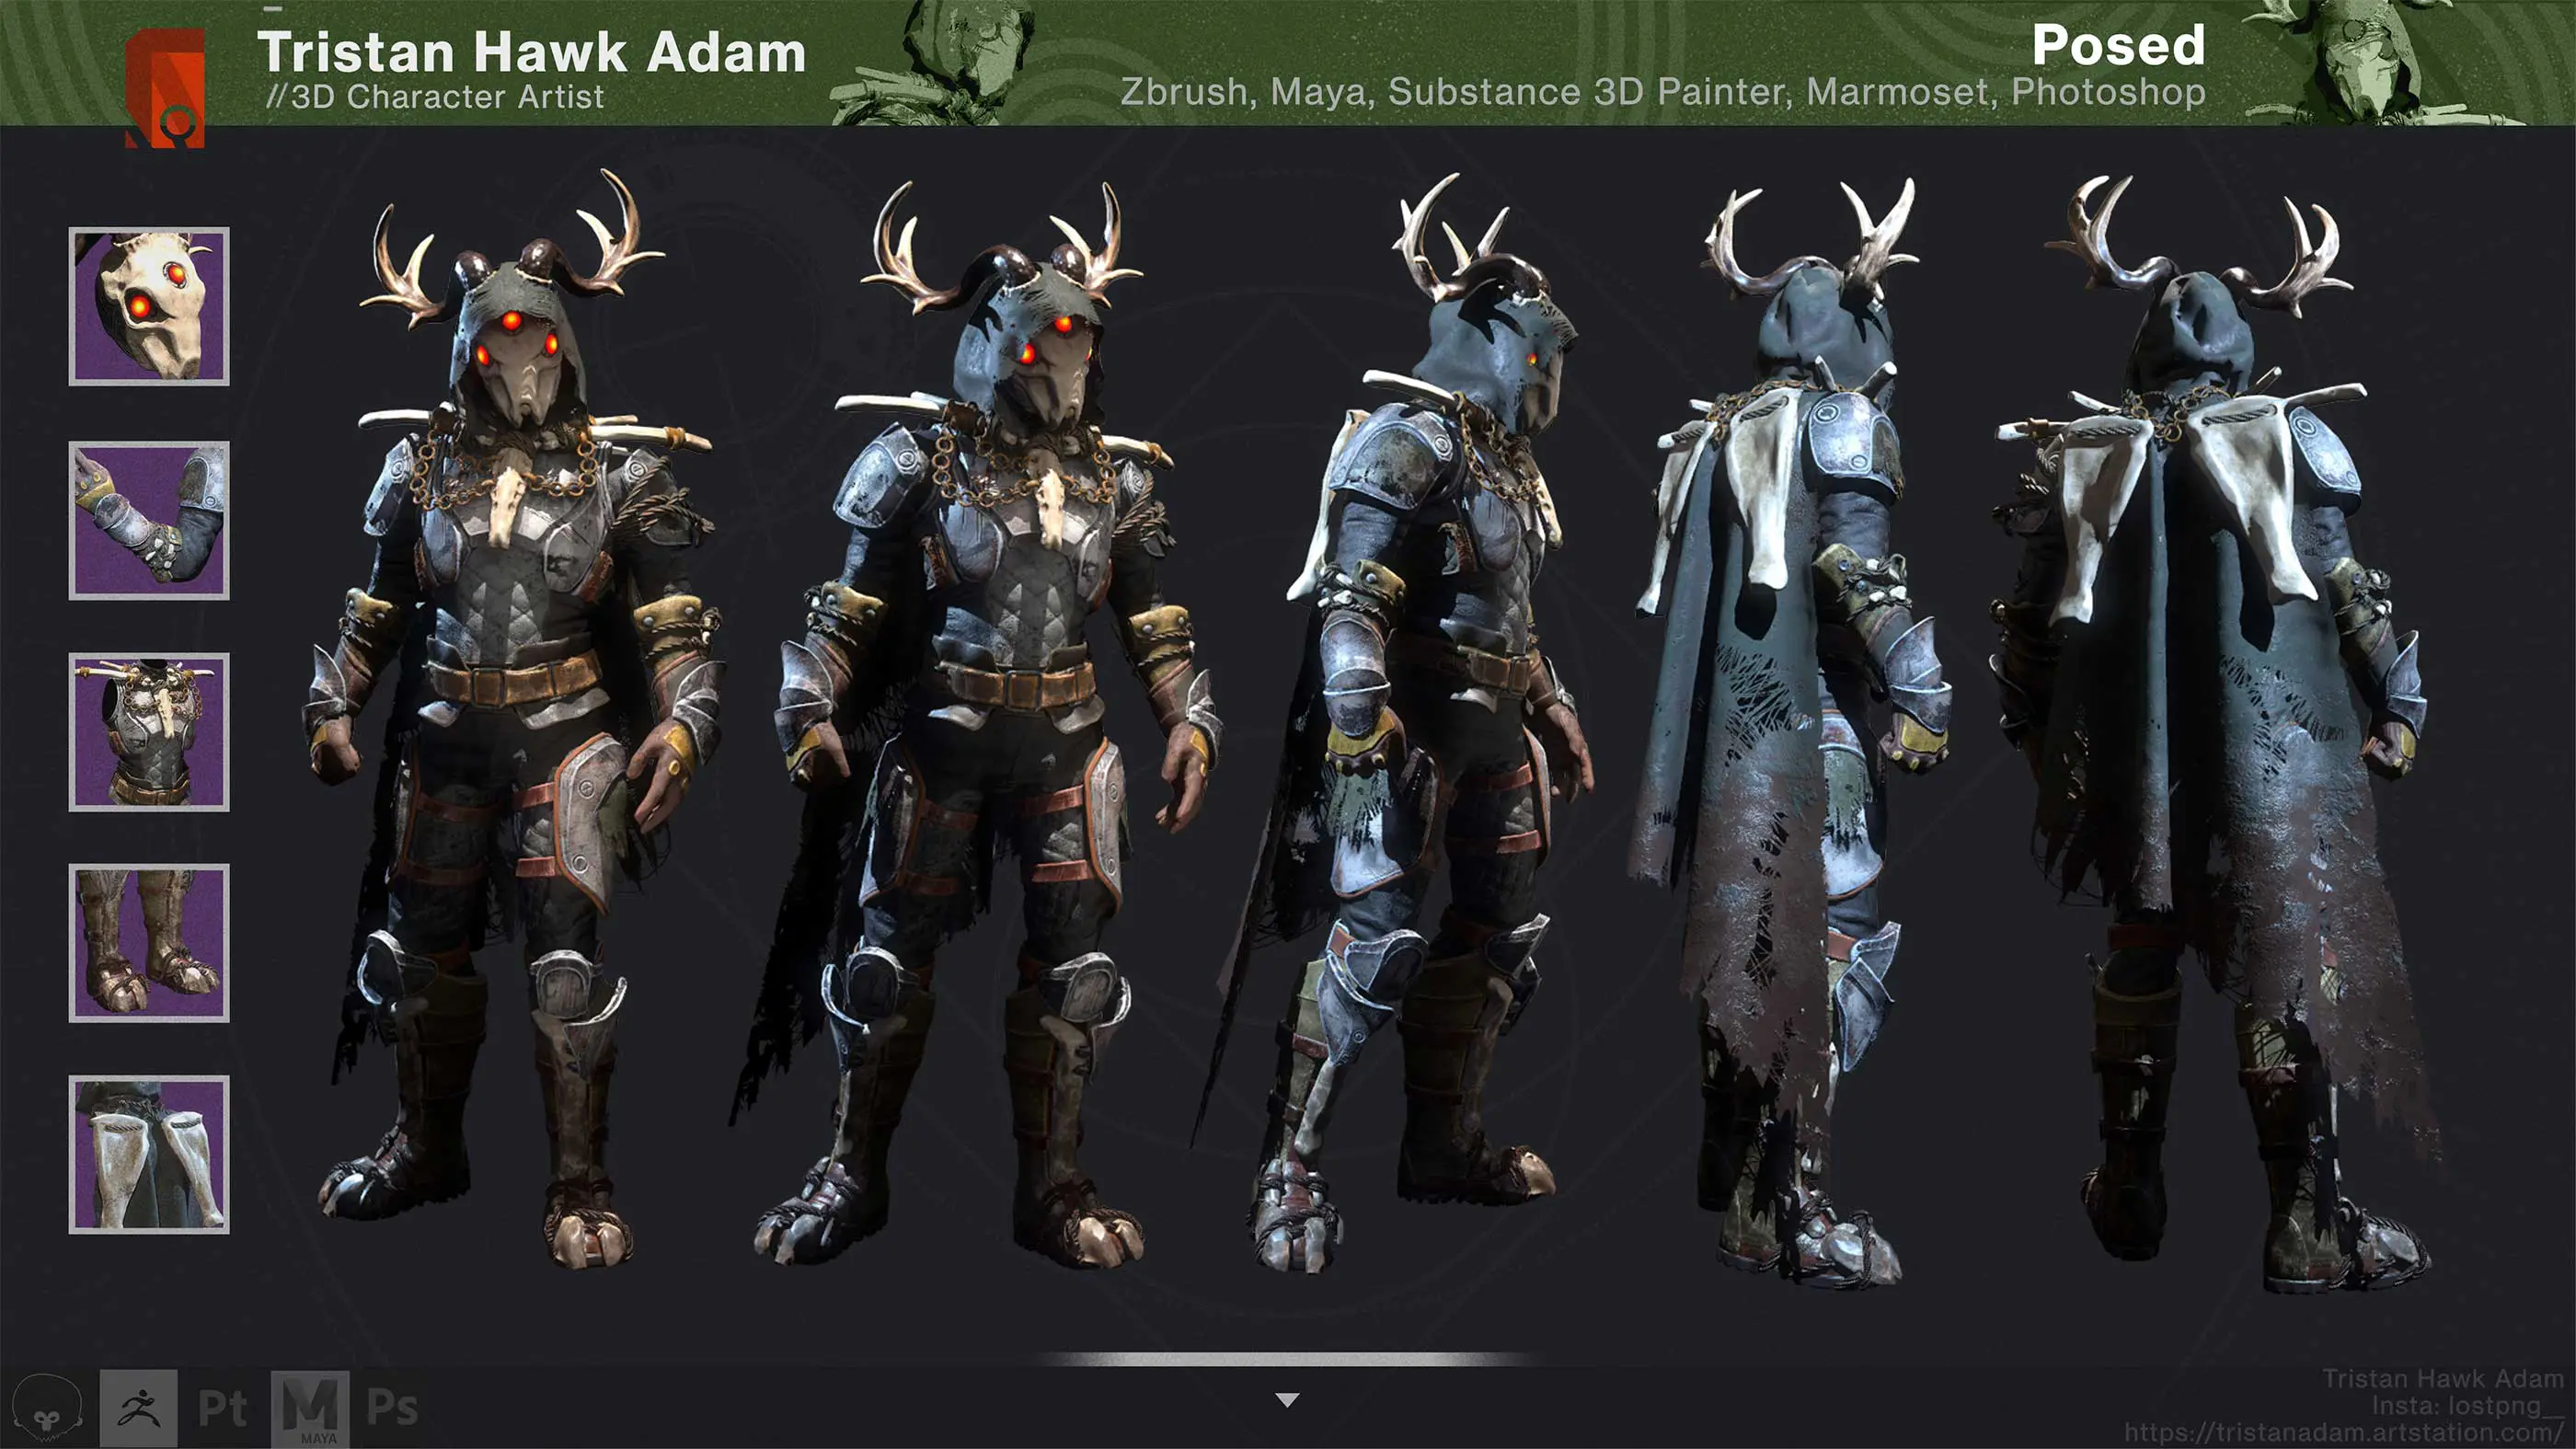 A 3D model with many angles of a suit of armor with horns and cape.